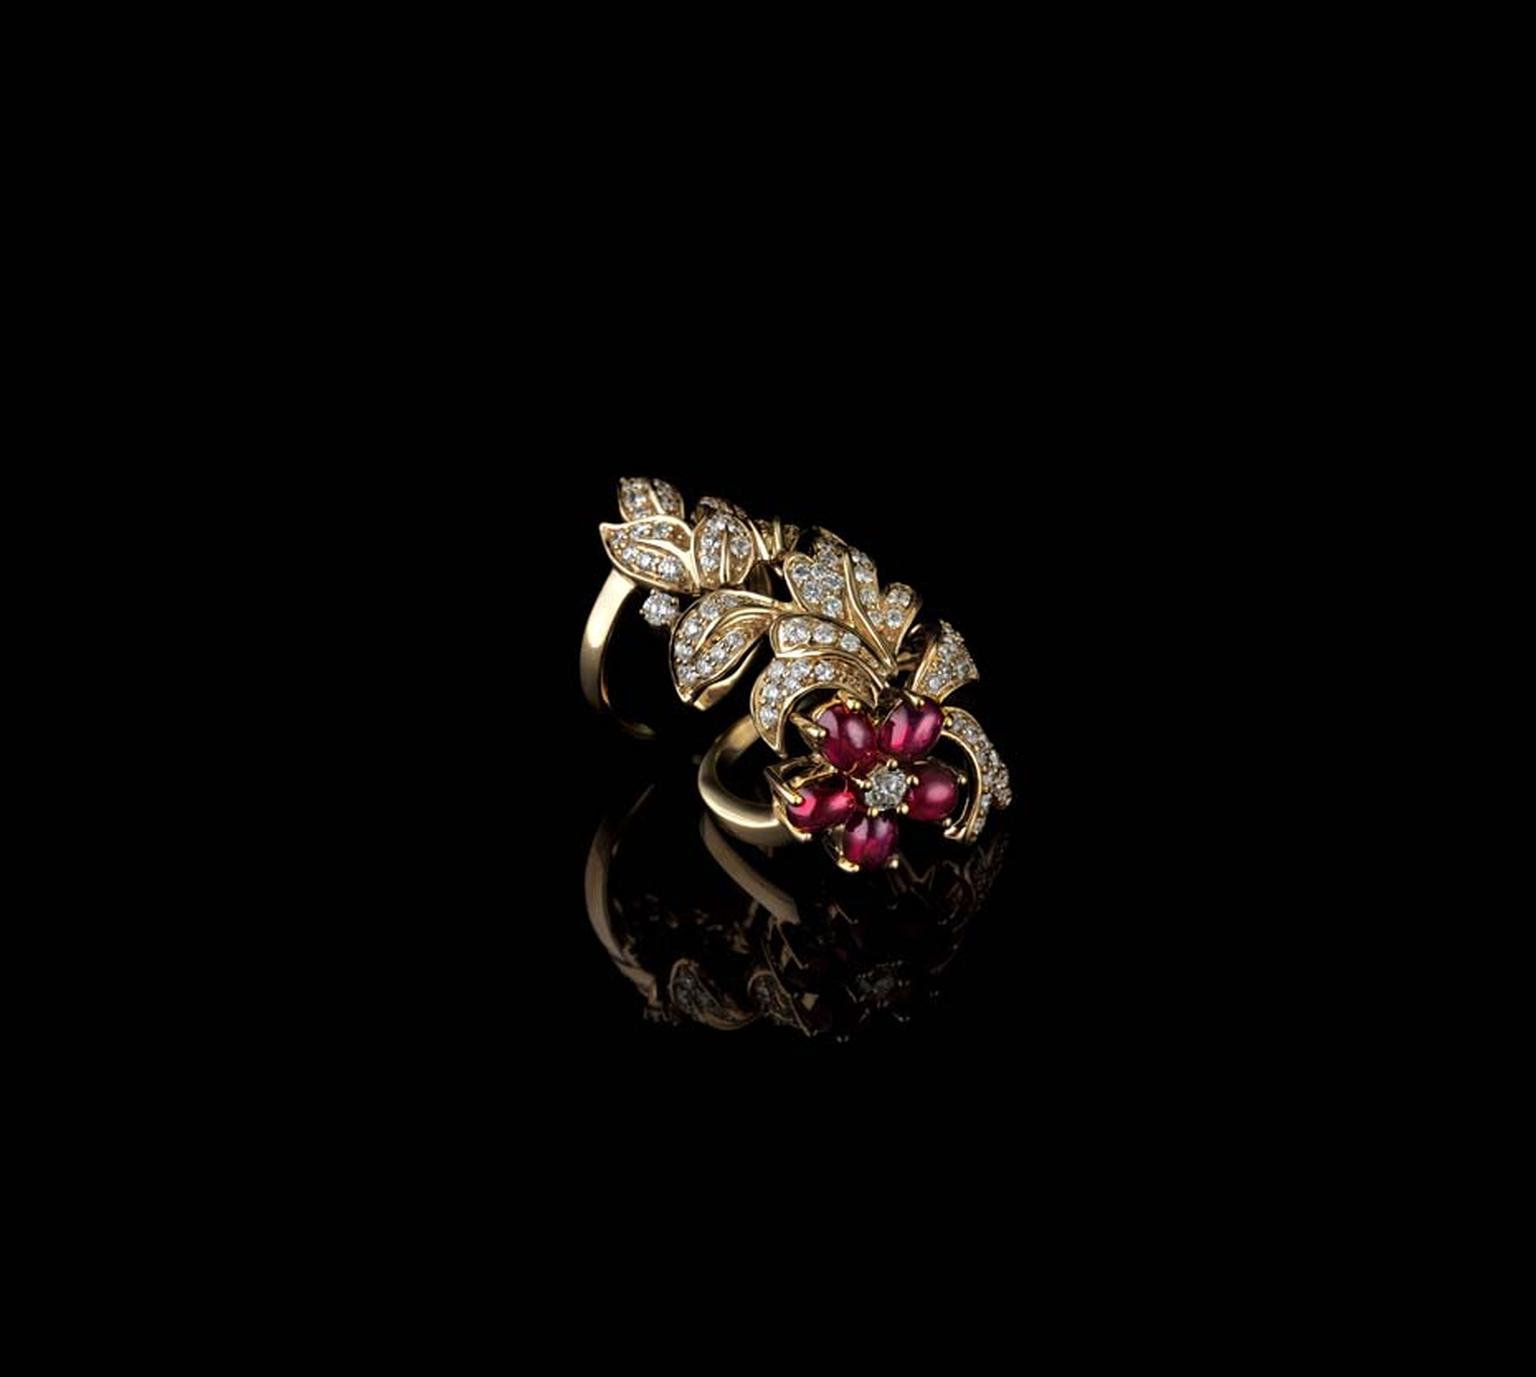 Farah Khan for Tanishq floral motif ruby ring with diamonds set in yellow gold.